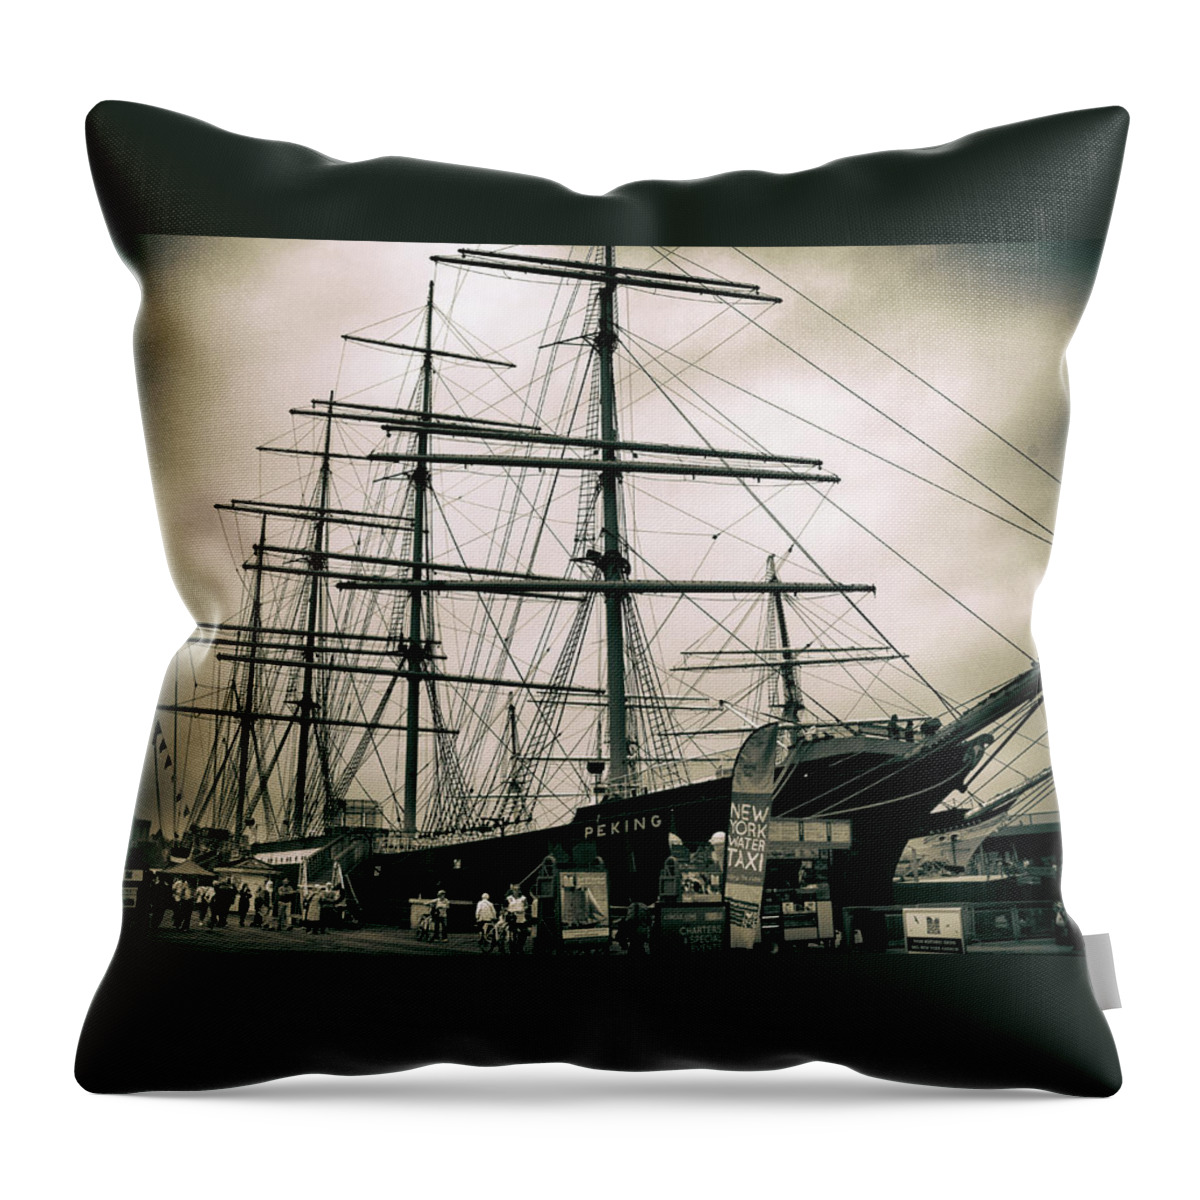 New York Throw Pillow featuring the photograph South Street Seaport by Jessica Jenney